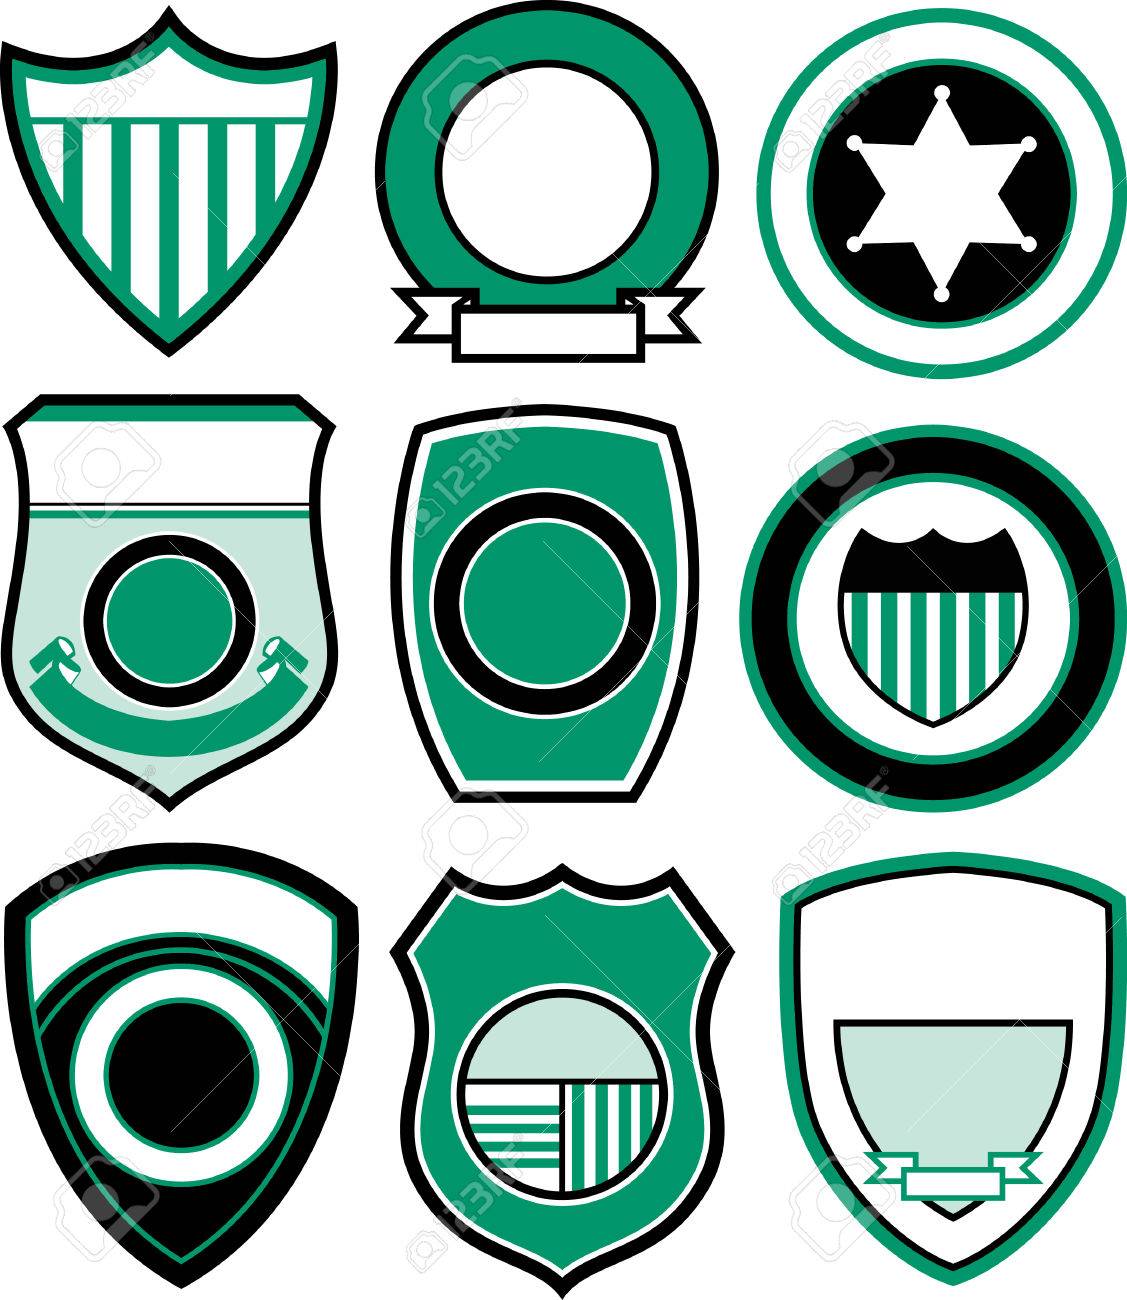 Free Printable Police Badge Template Free download on ClipArtMag